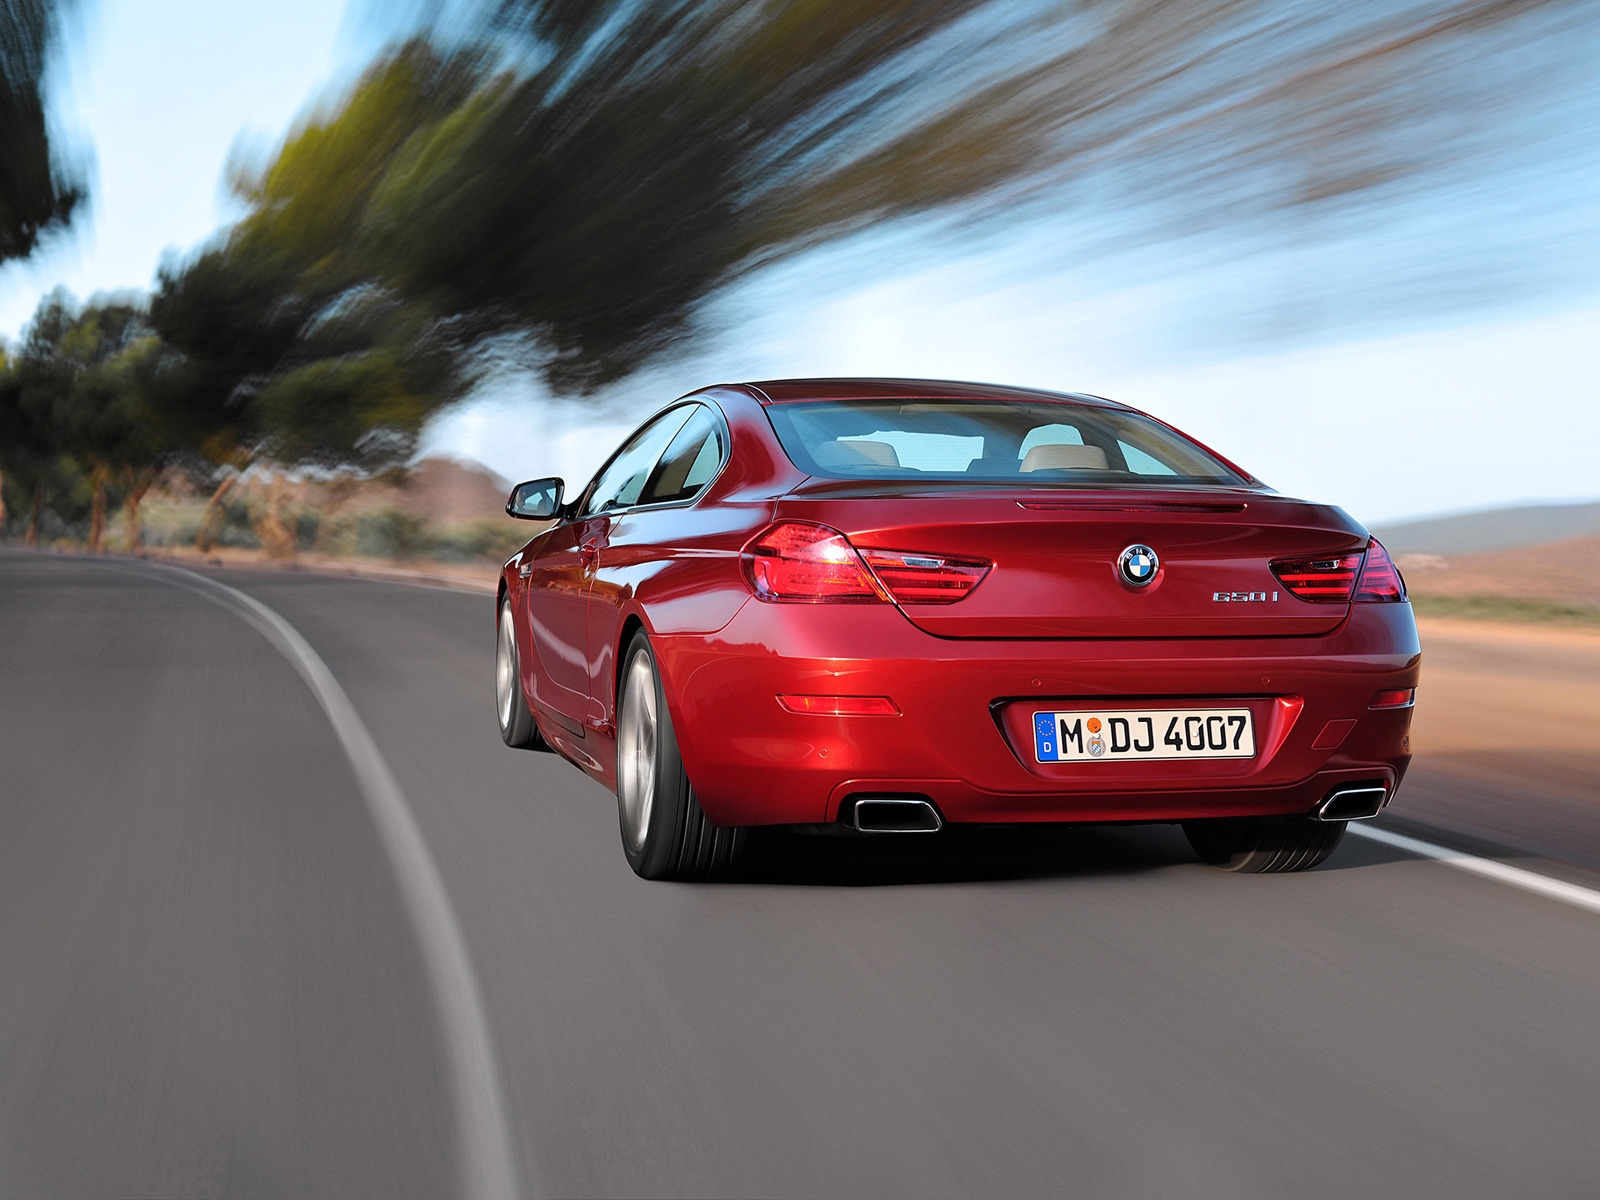 BMW 650i Coupe Rear for 1600 x 1200 resolution